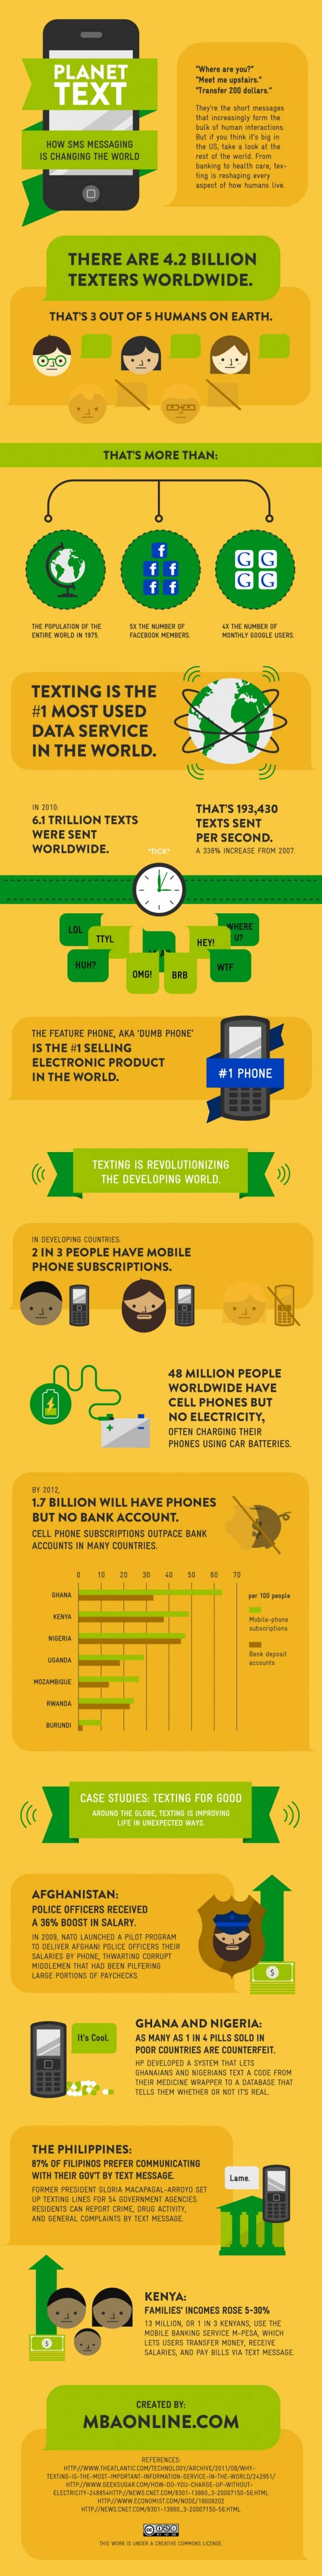 SMS Infographic